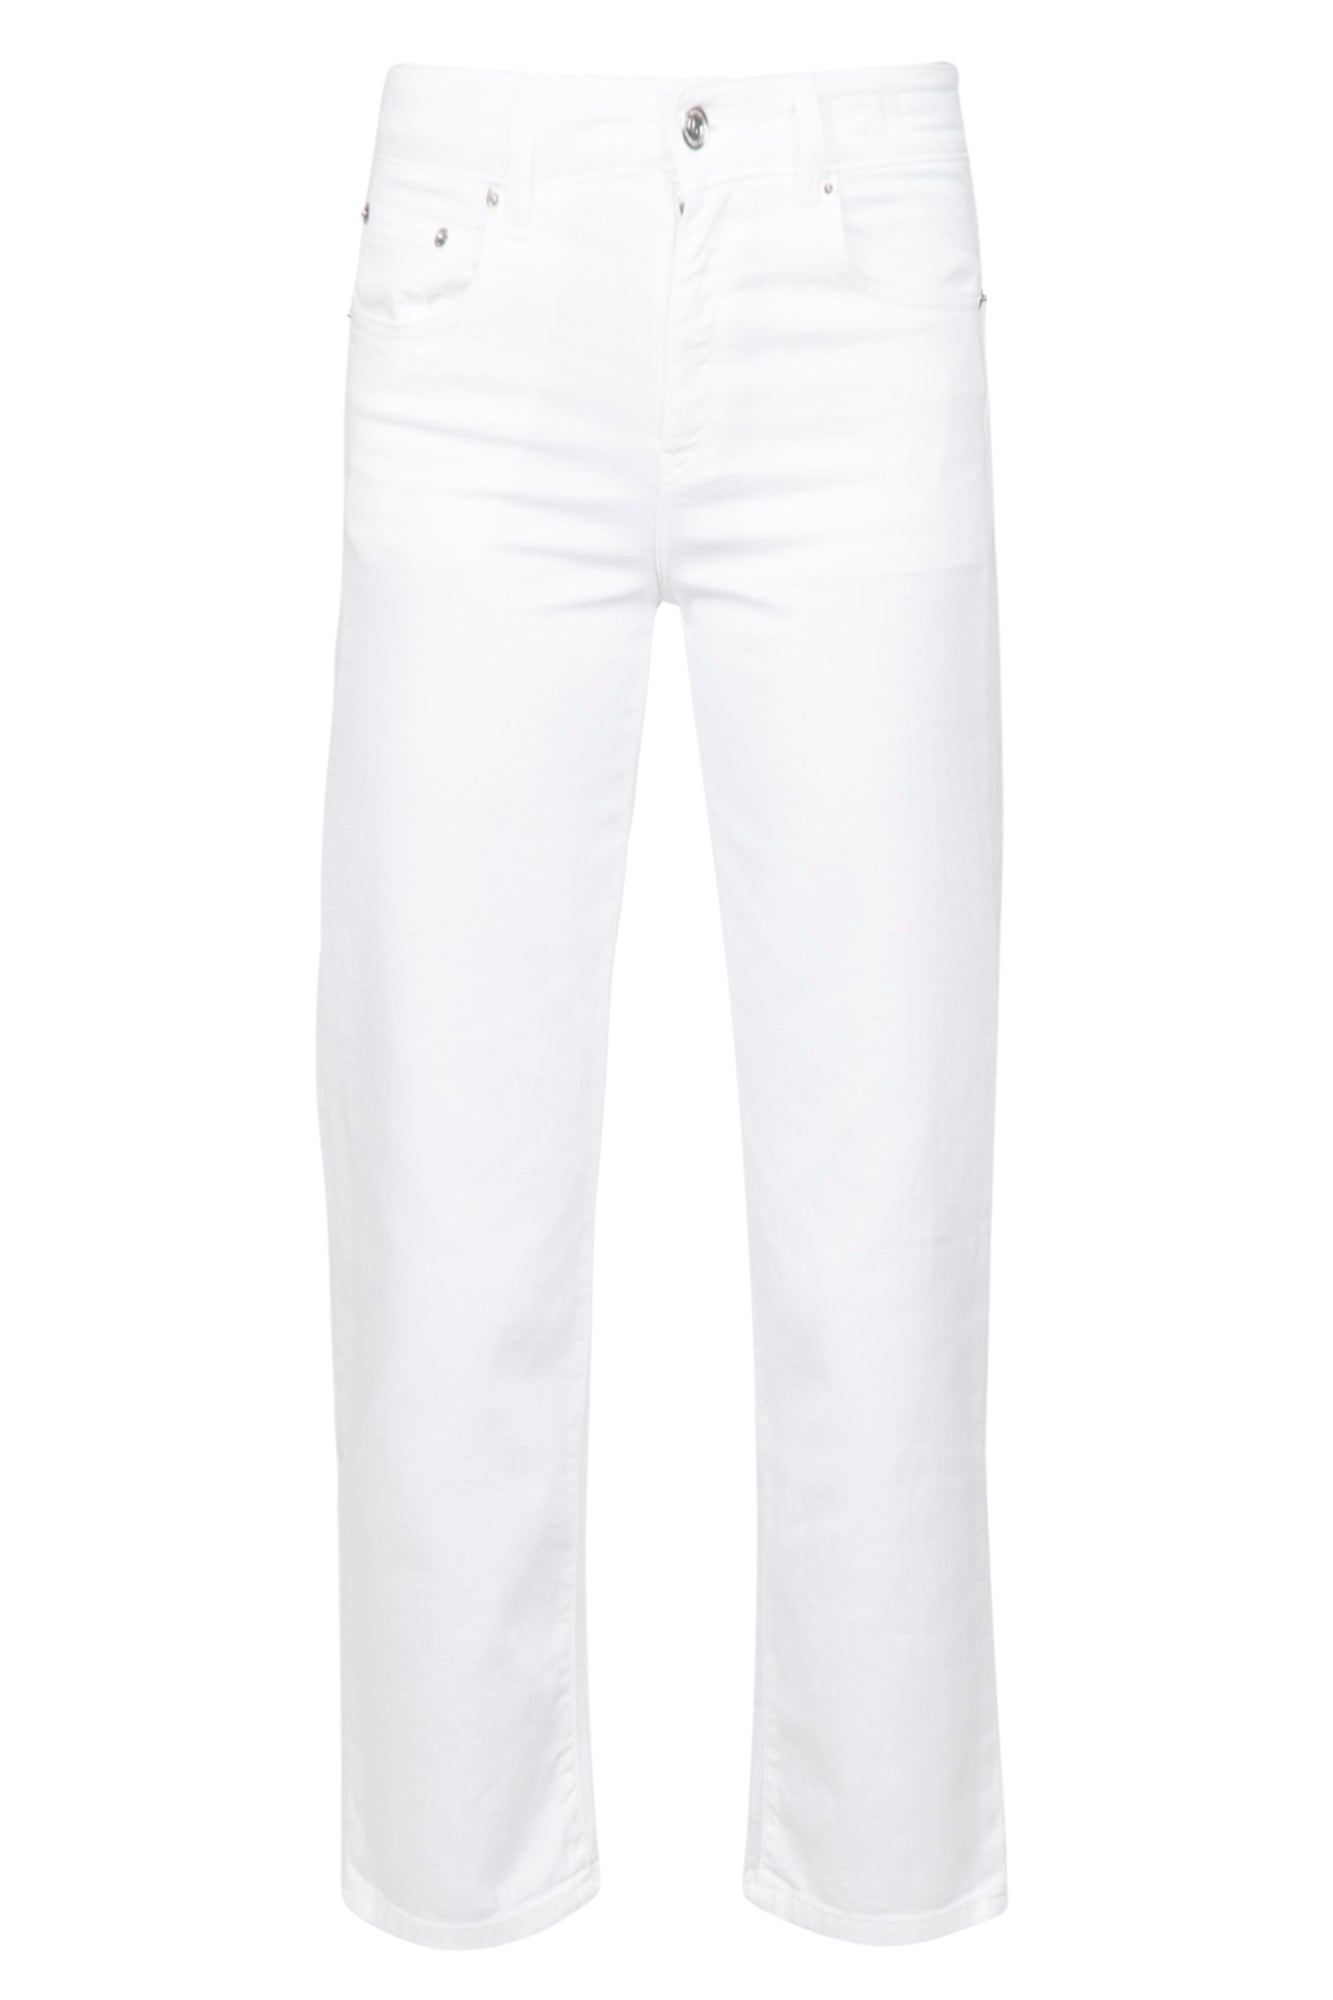 Department 5 - Jeans - 430410 - Bianco